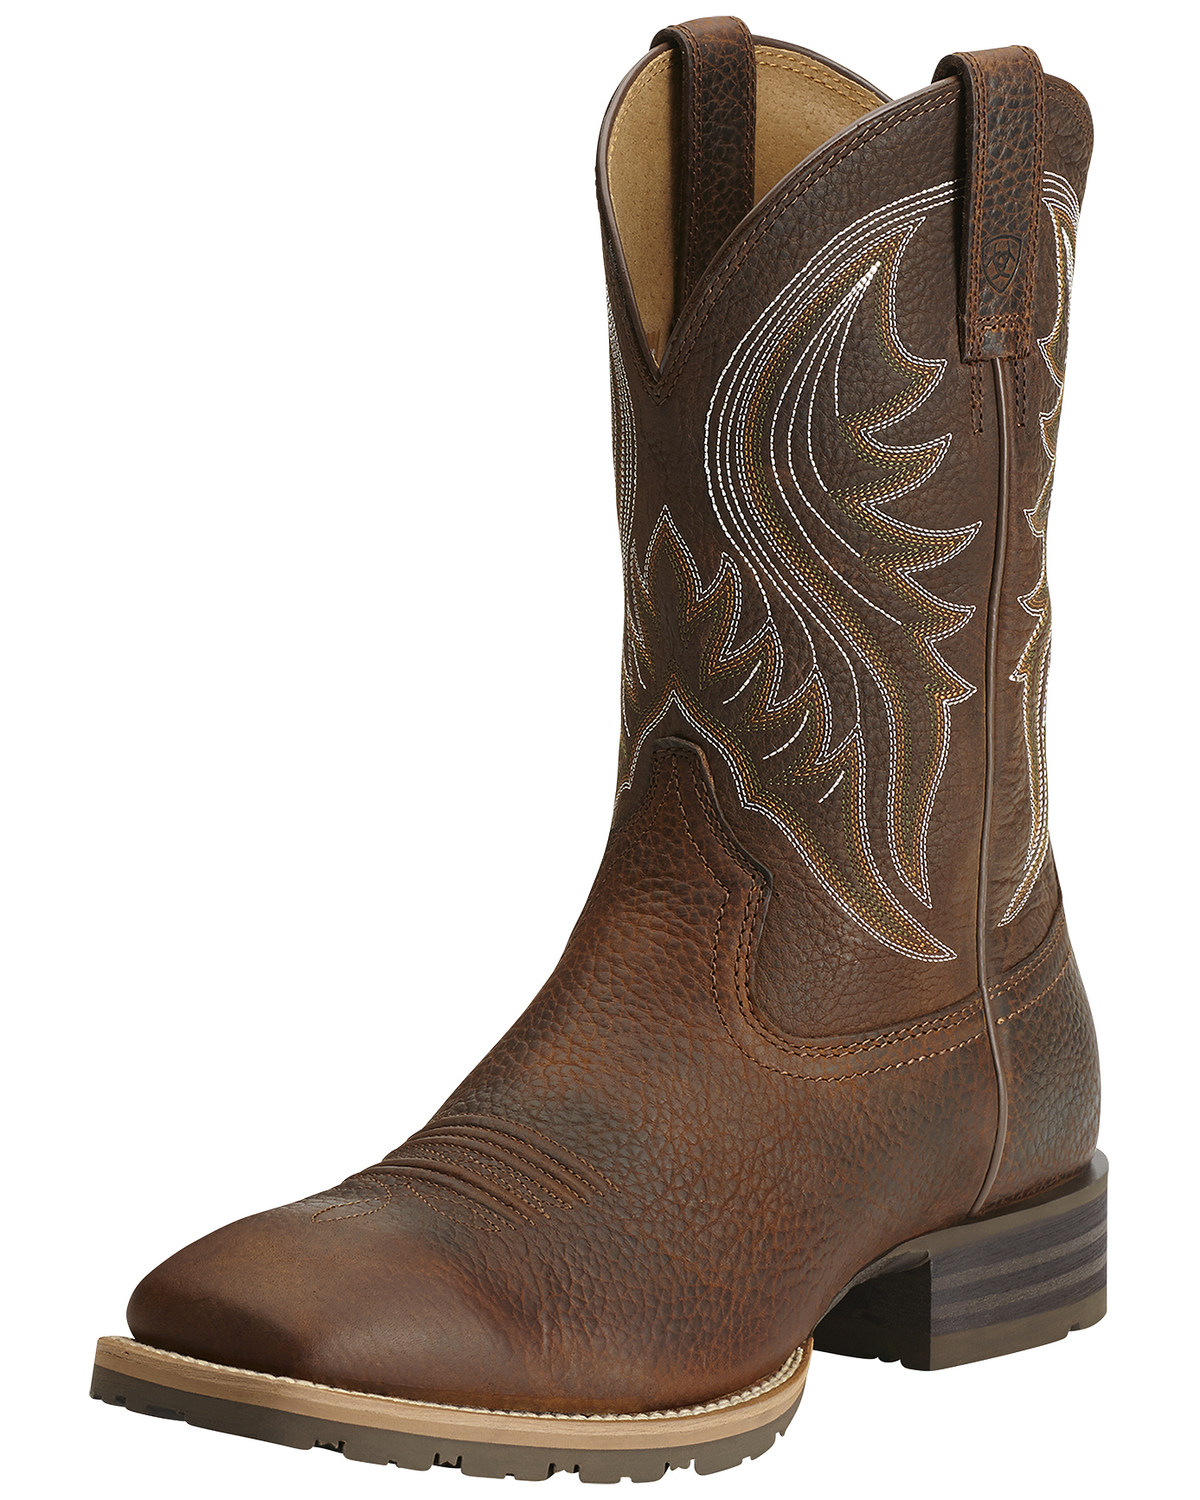 Ariat Men's Hybrid Rancher Western Performance Boots - Broad Square Toe